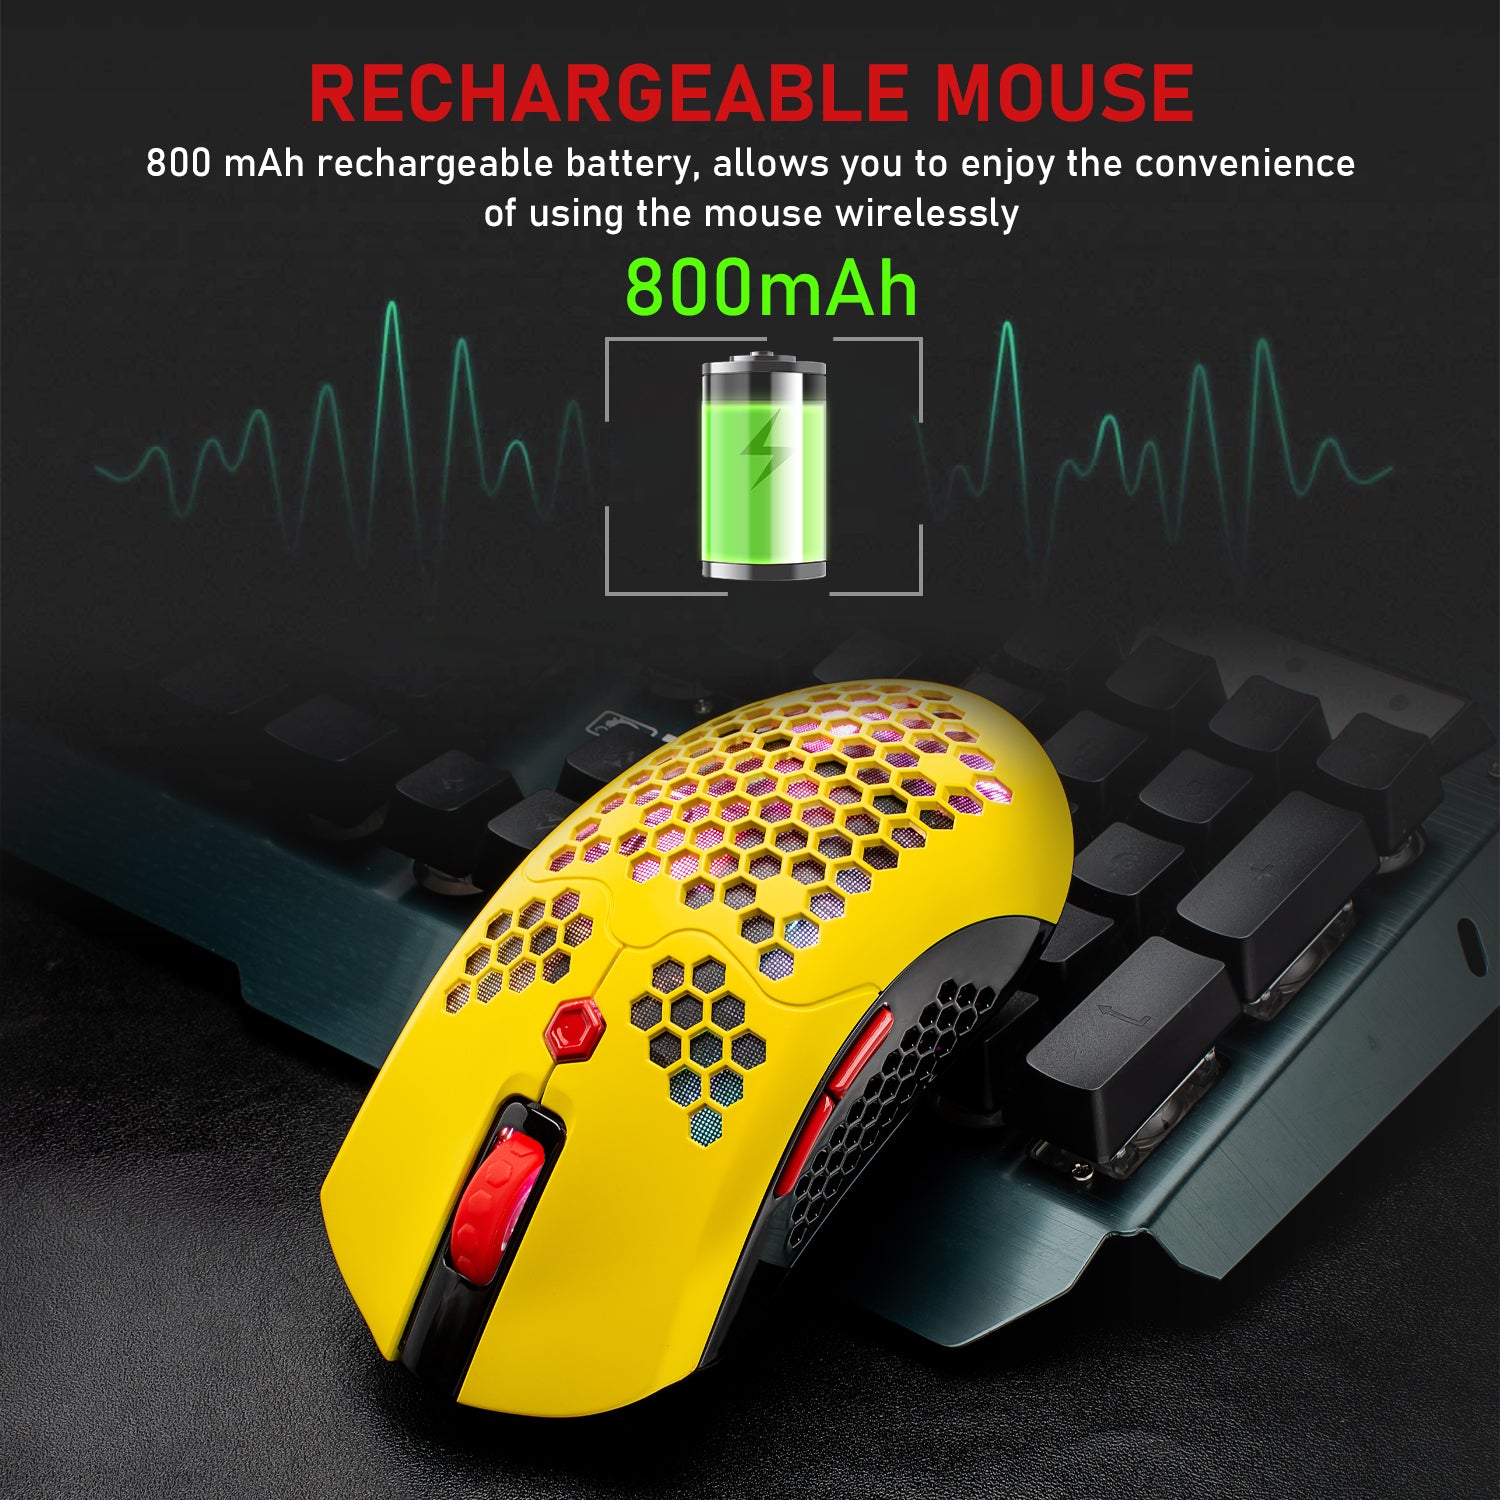 ZIYOU LANG X2 Wireless/ Wired Gaming Mouse,16 RGB Backlit Ultralight Honeycomb Shell with Programmable Driver,Rechargeable 800mA,12000 DPI